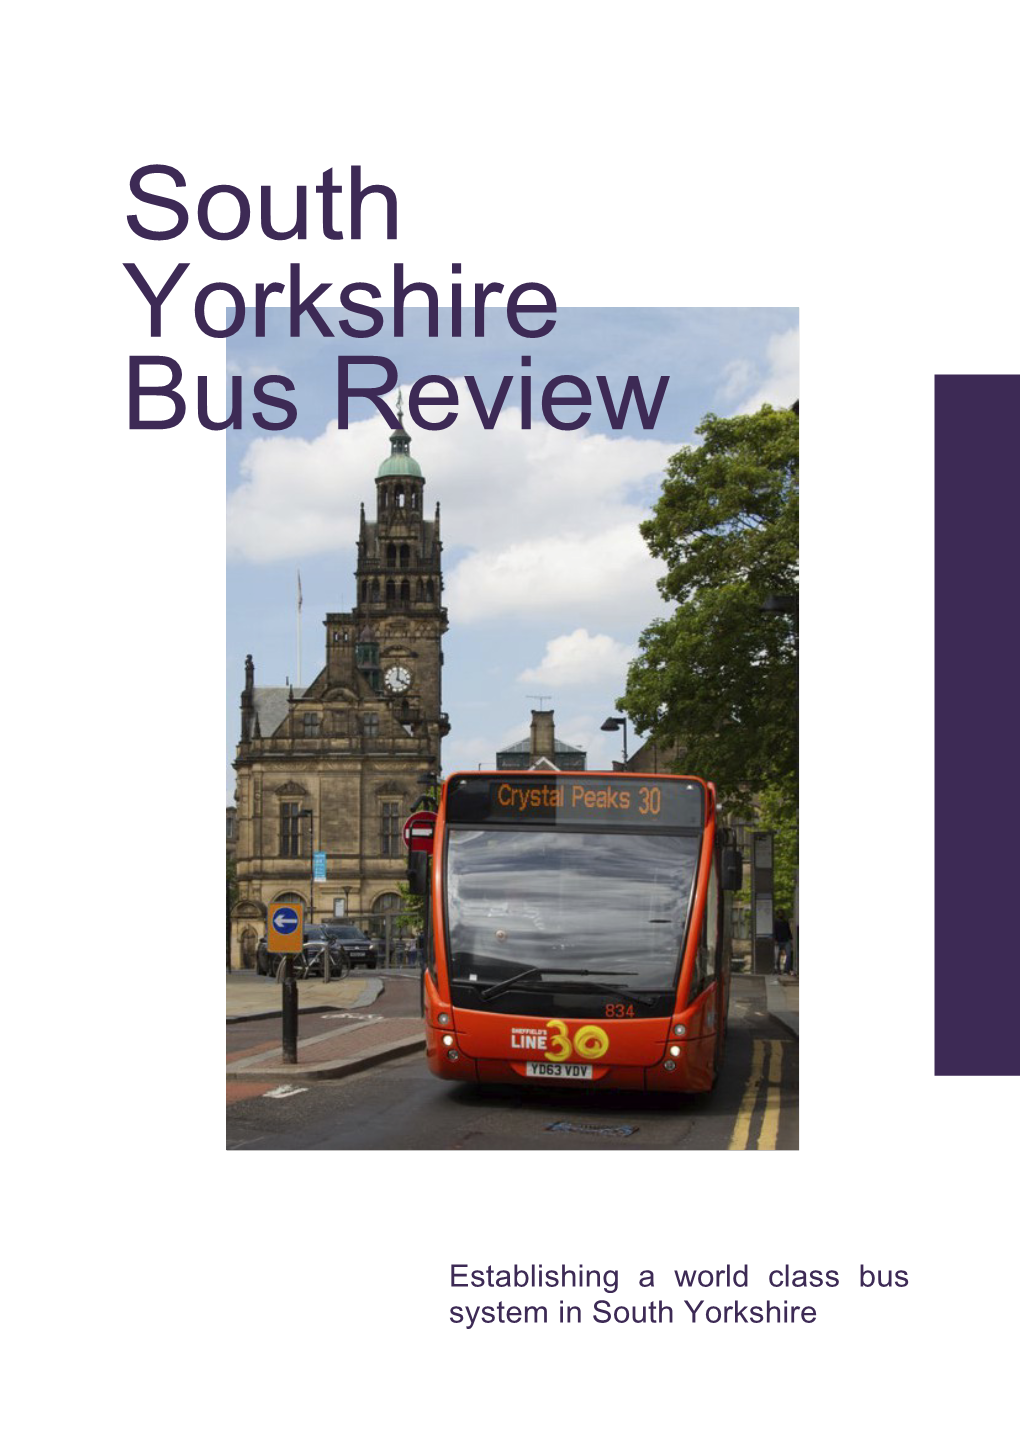 South Yorkshire Bus Review Summary of Findings 10 the Importance of Buses 16 Approach to the Review 28 Findings 34 the Challenges 38 Recommendations 84 Annexes 94